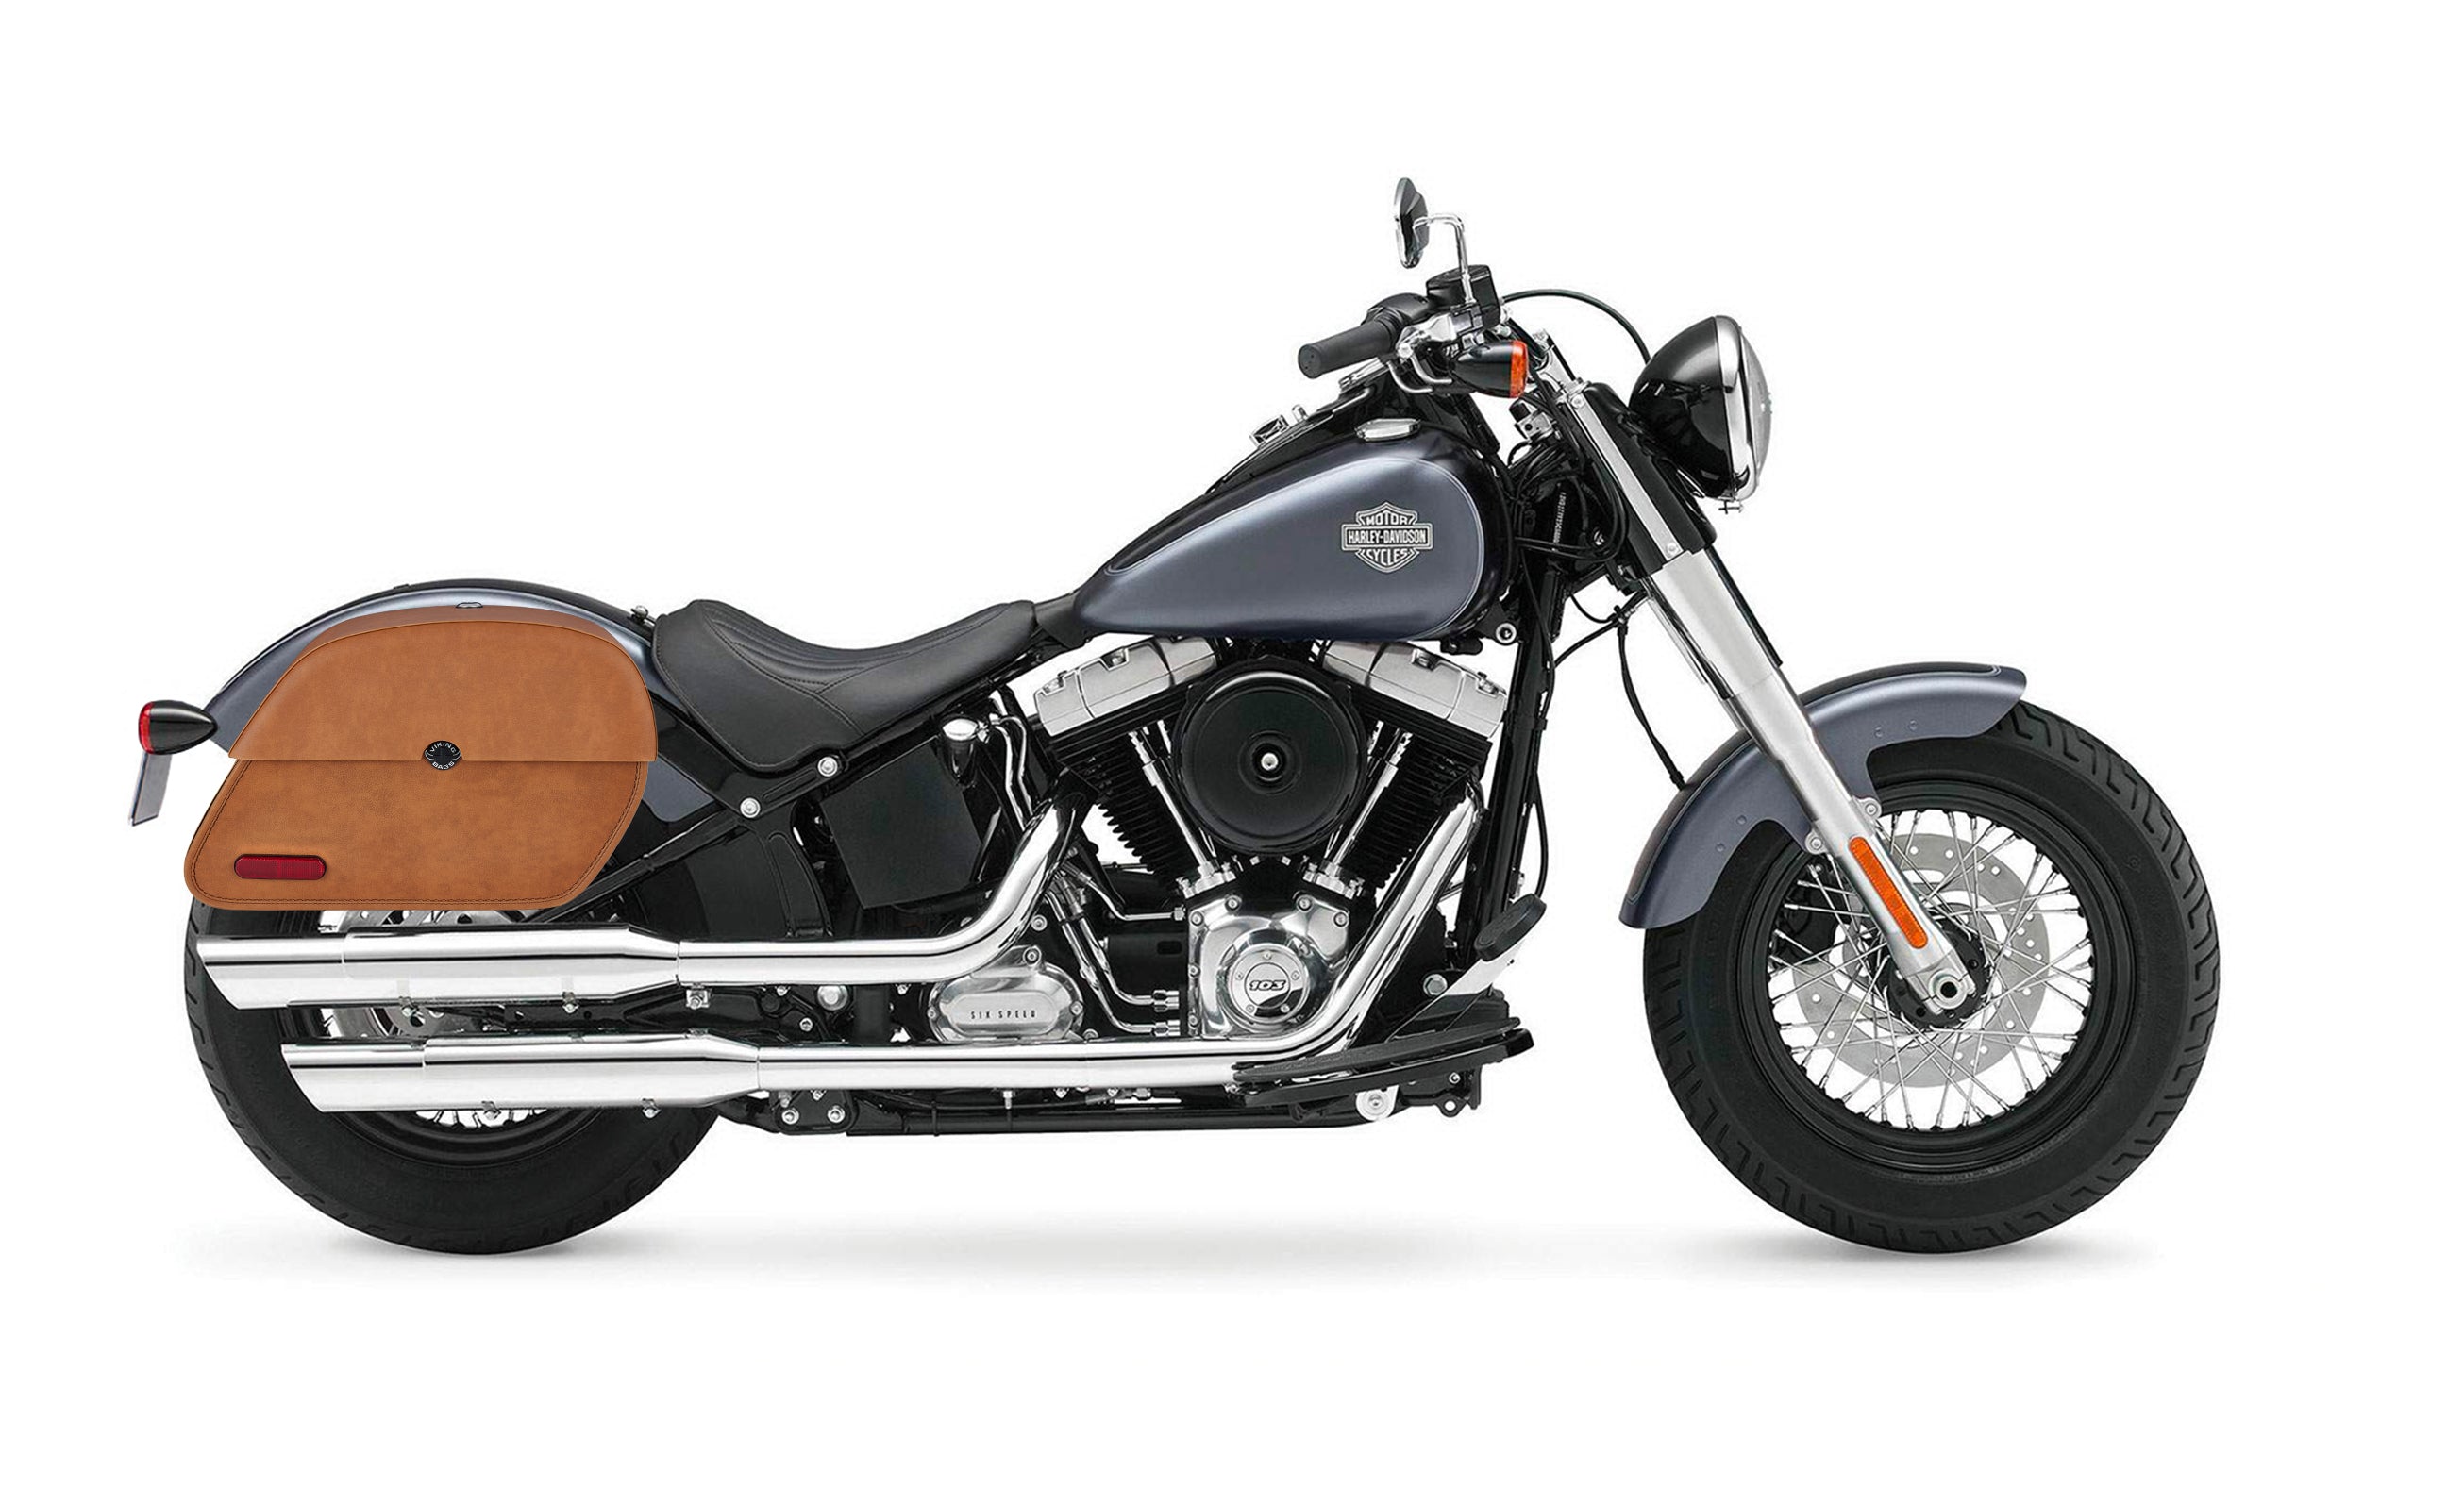 33L - Panzer Brown Large Leather Motorcycle Saddlebags for Harley Softail Slim FLS on Bike Photo @expand